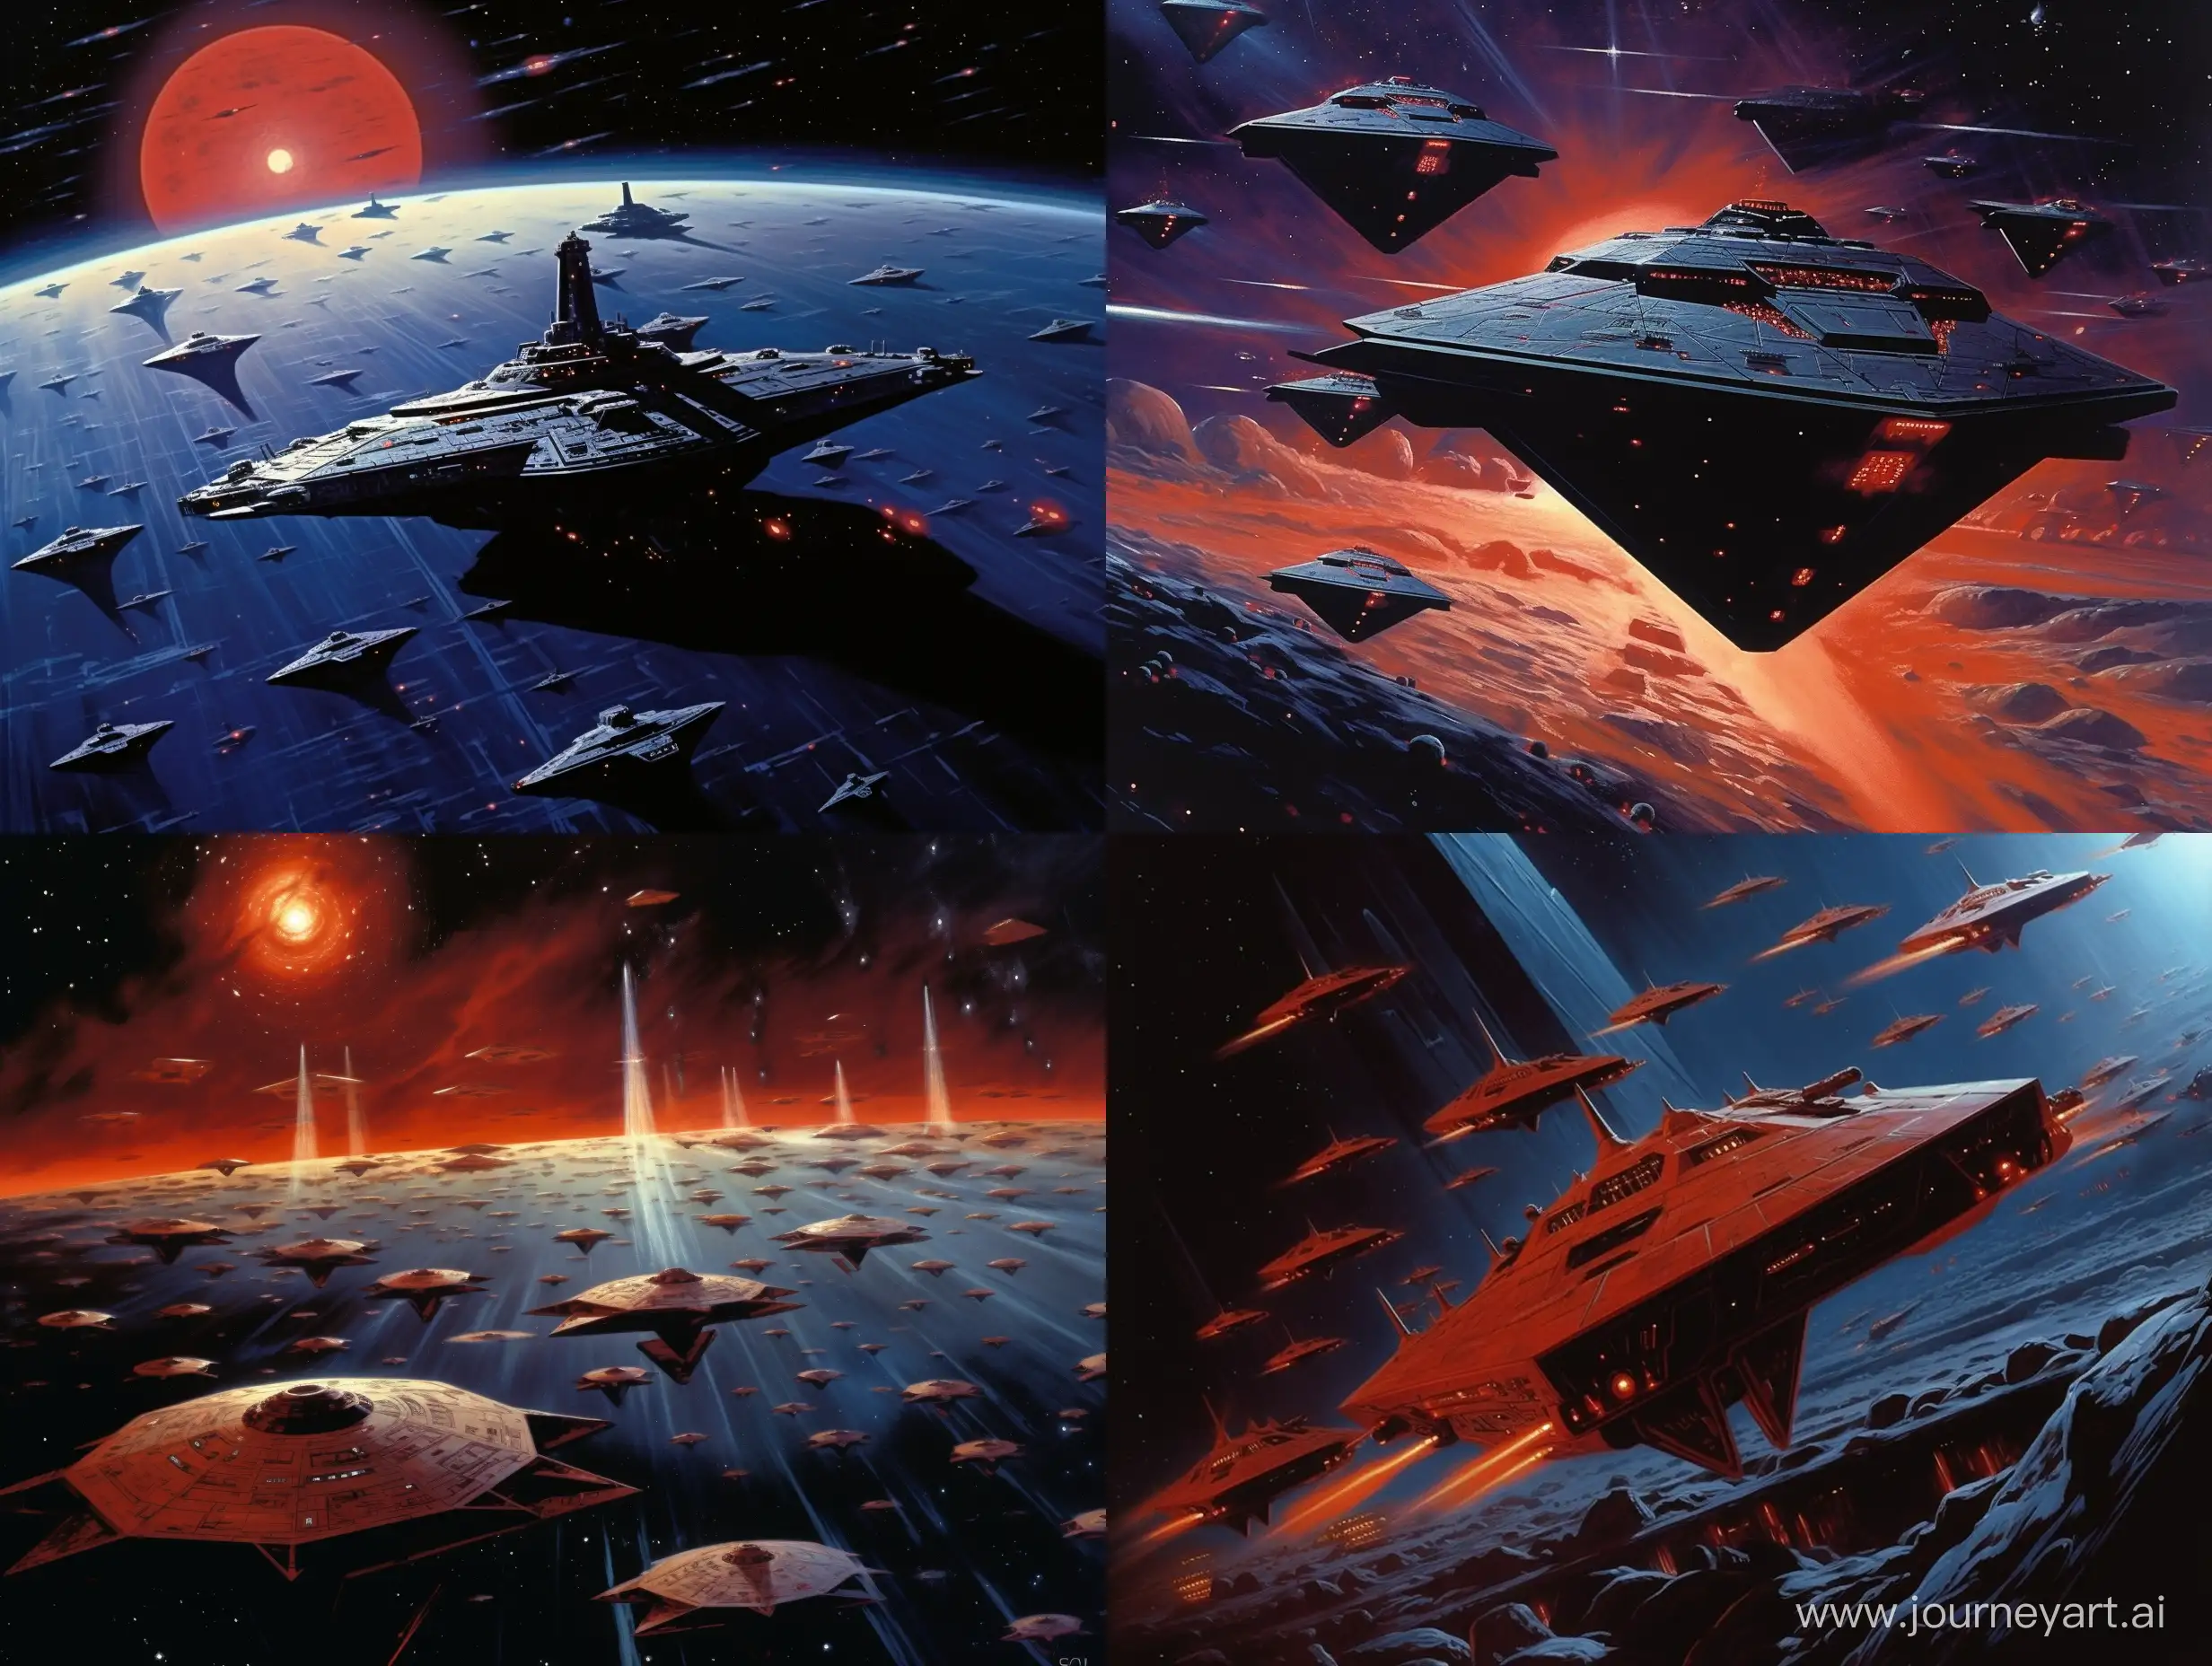 A fleet of threatening detailed military star destroyers in outer space drawn by Ralph McQuarrie. 1977. retro science fiction art. in color. star wars.